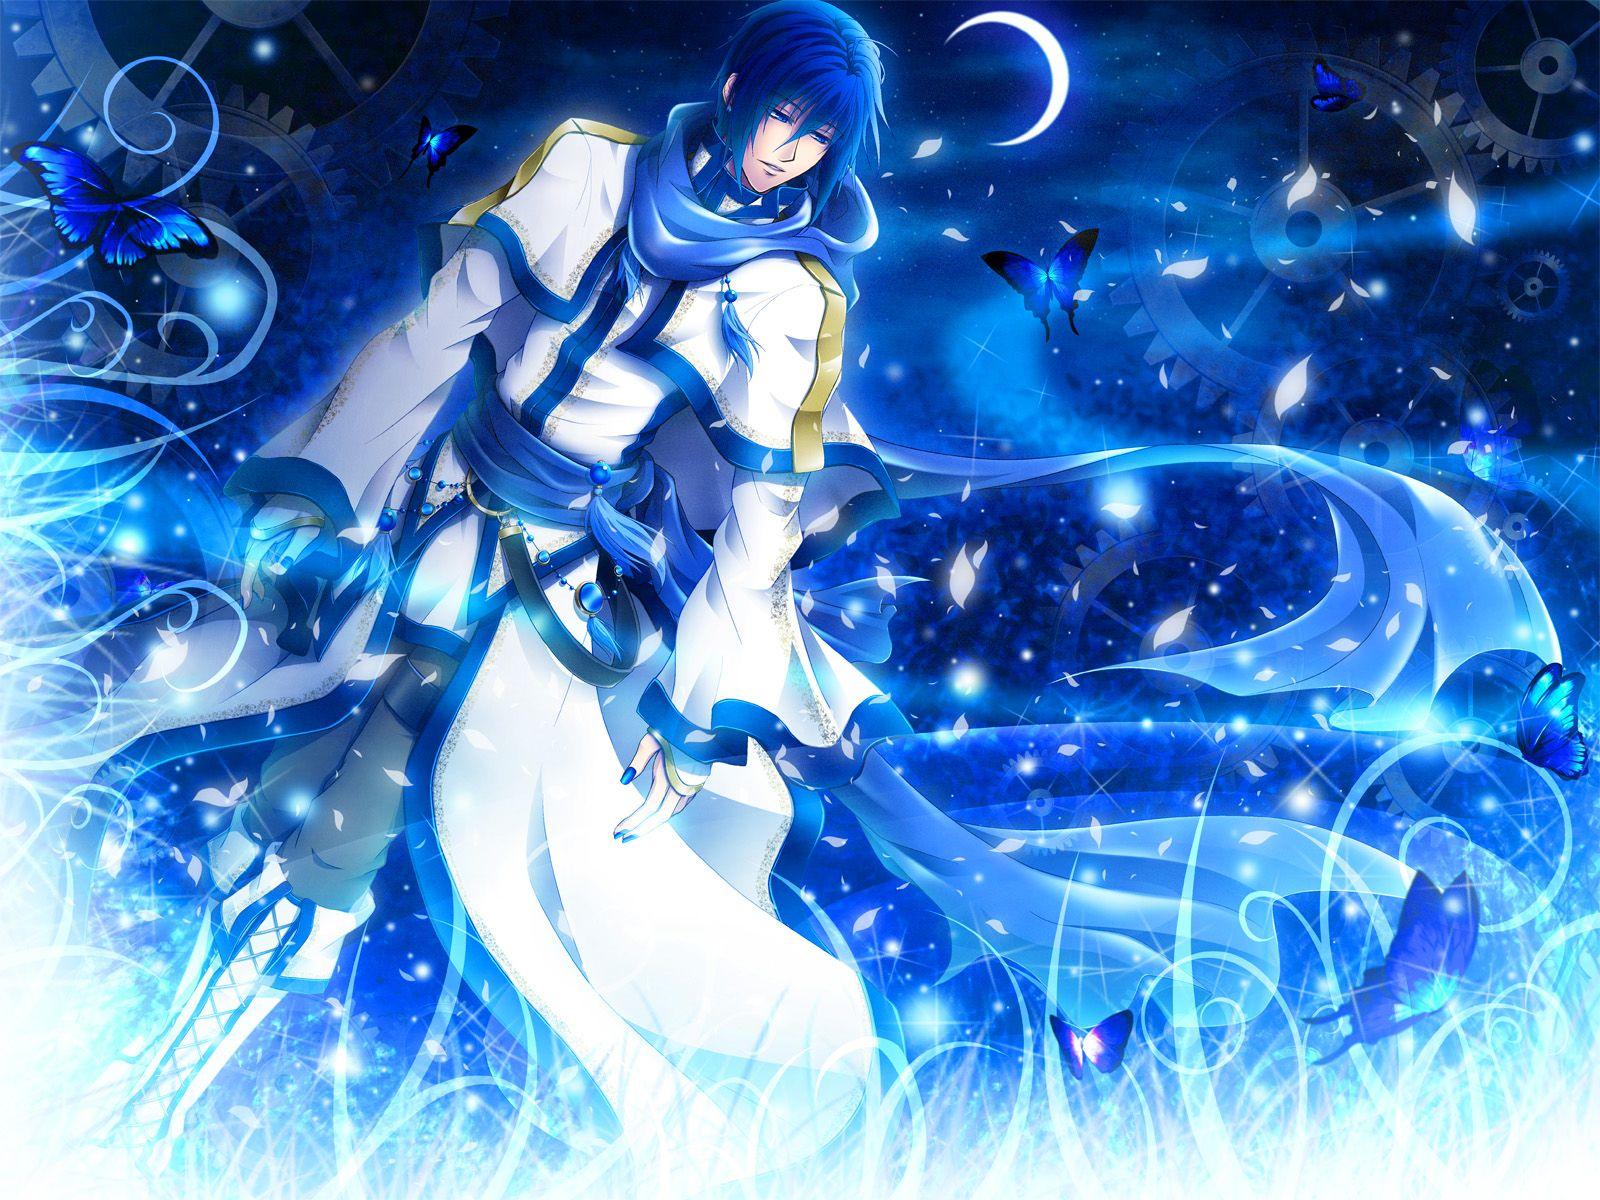 Kaito Shion Wallpaper and Background Imagex1200